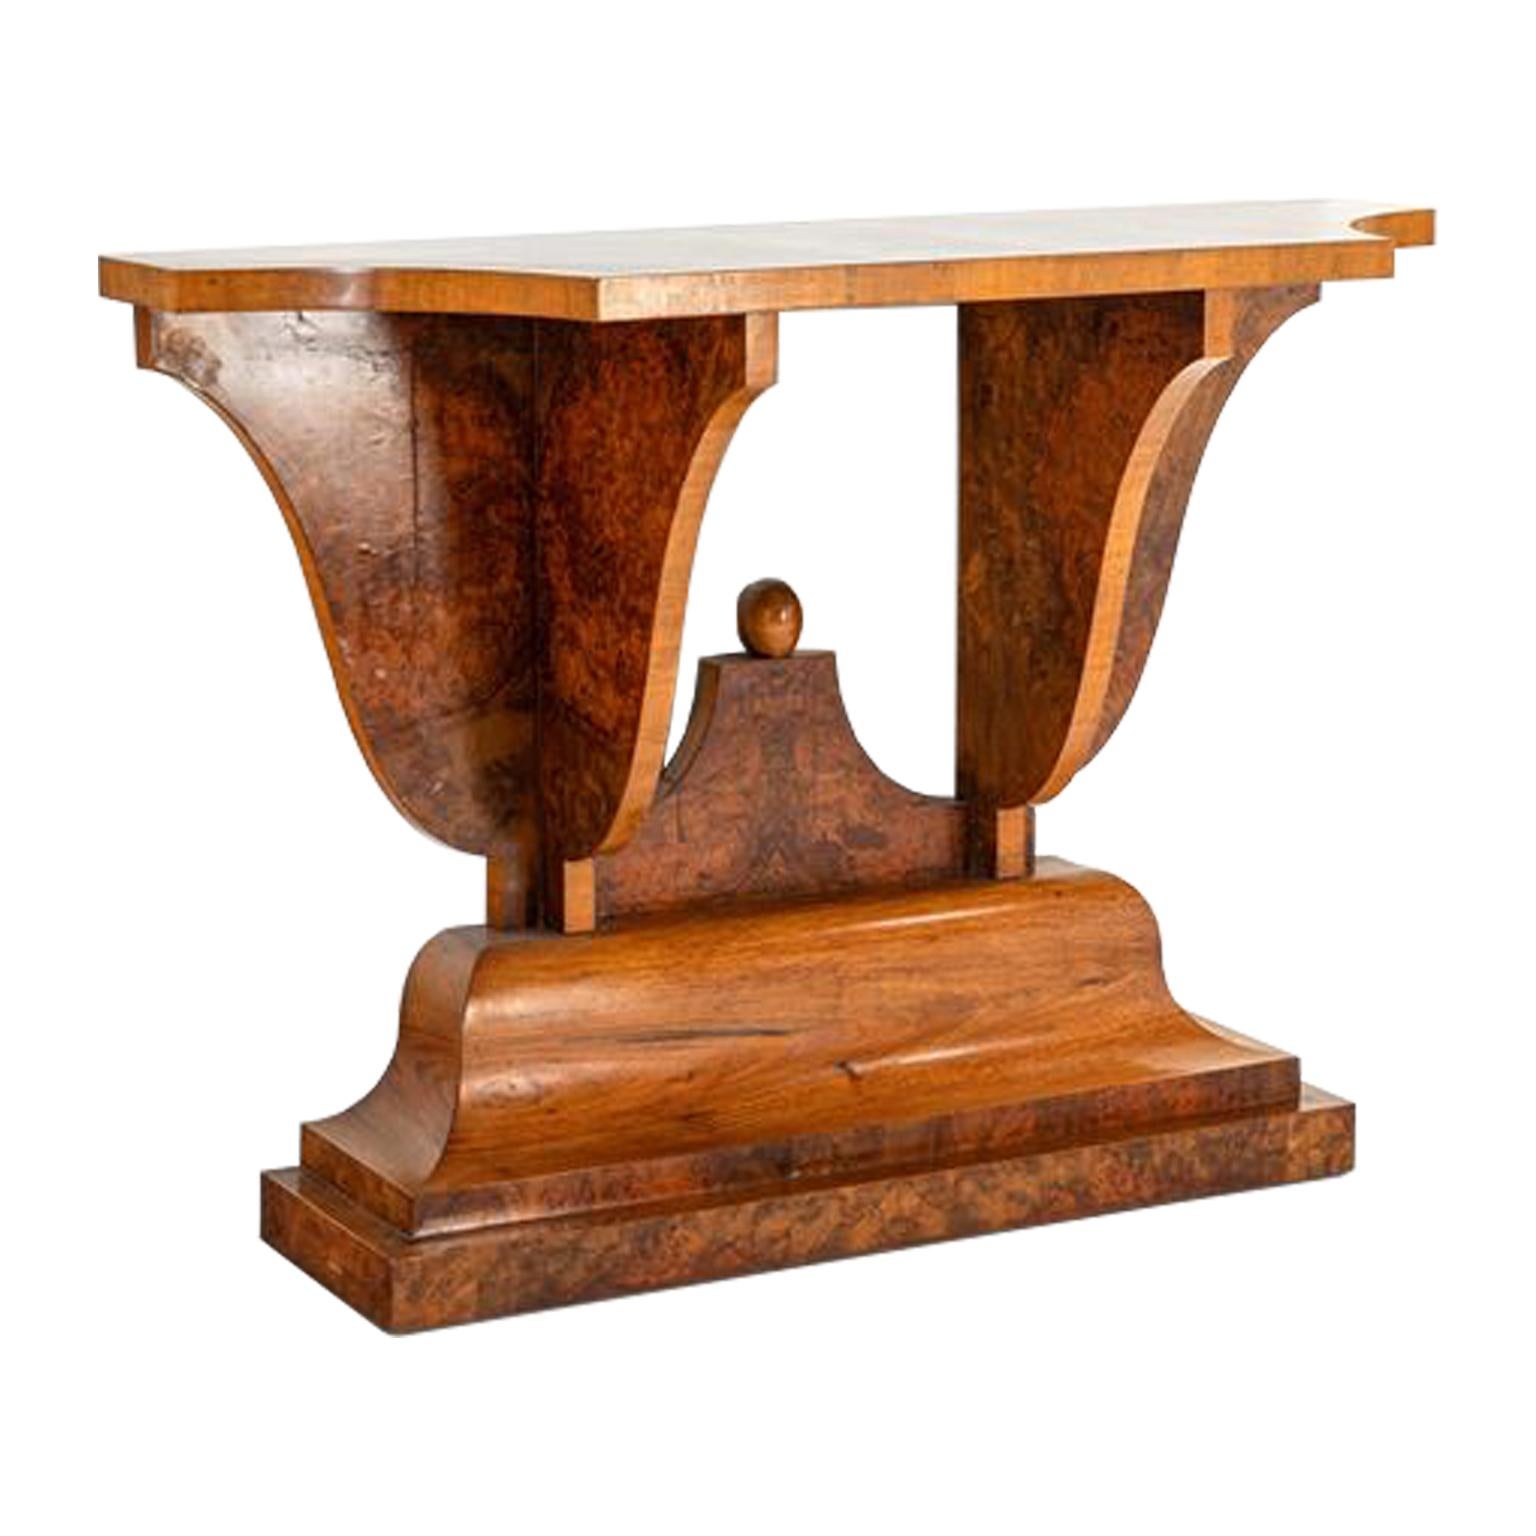 This ornate Italian Art Deco console features unique curved details throughout. The intricacy is echoed in the beautiful grain of the light European Walnut Burl and Rosewood accents used on this piece. Original Condition.